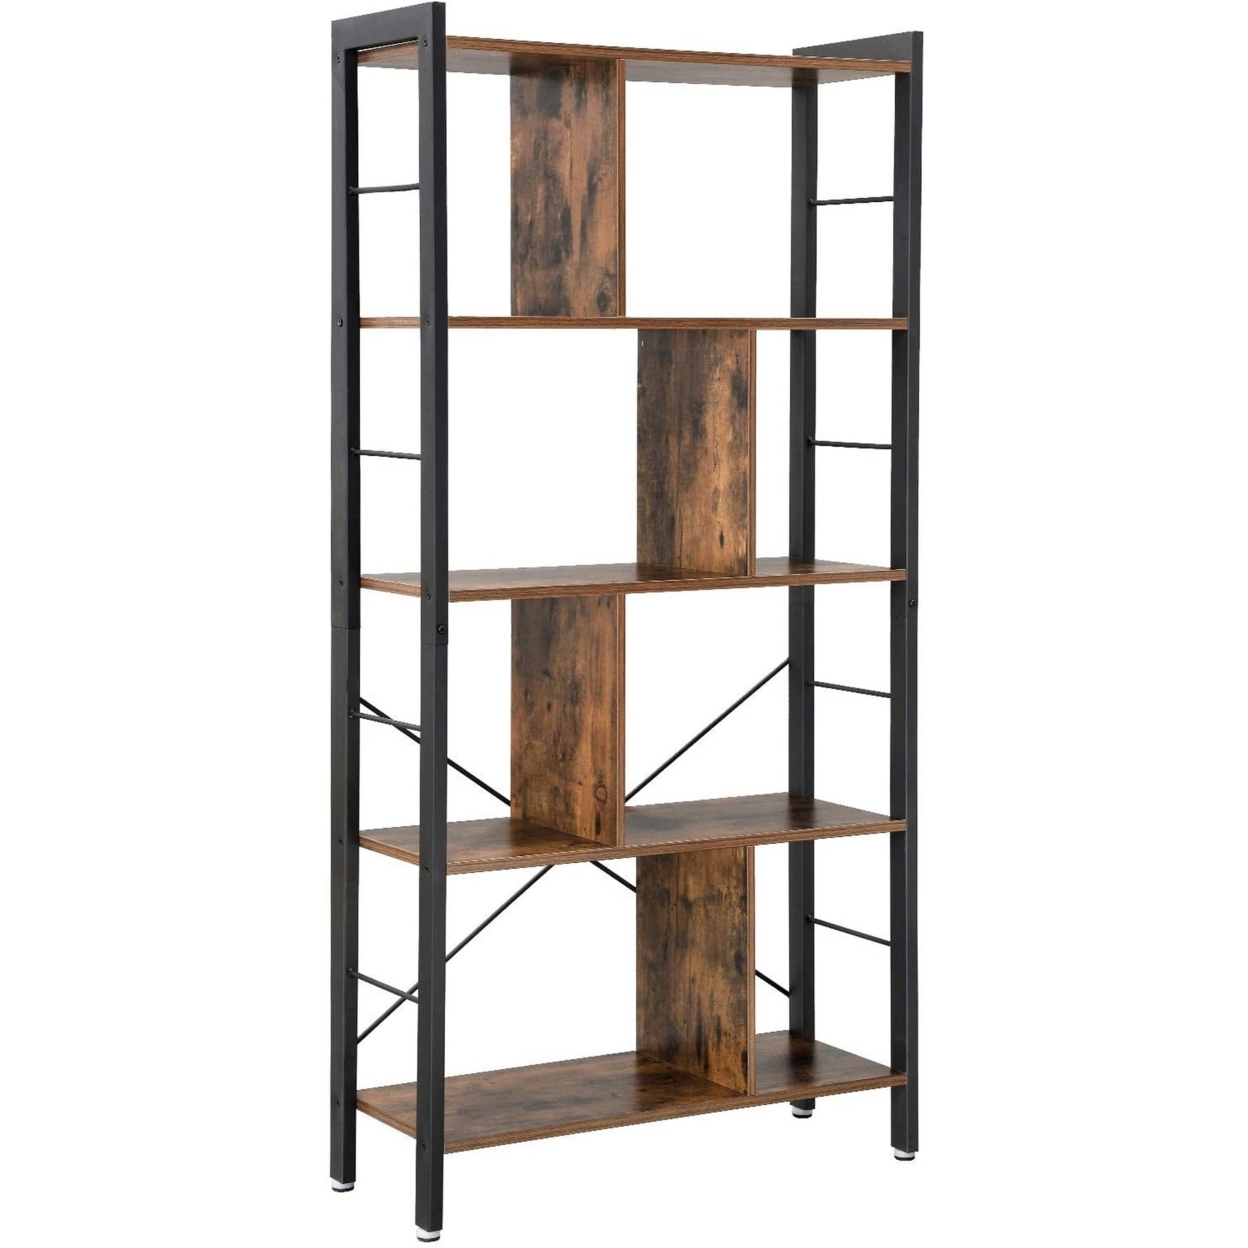 4 Tier Wood And Metal Bookcase With Crossbars, Brown And Black- Saltoro Sherpi